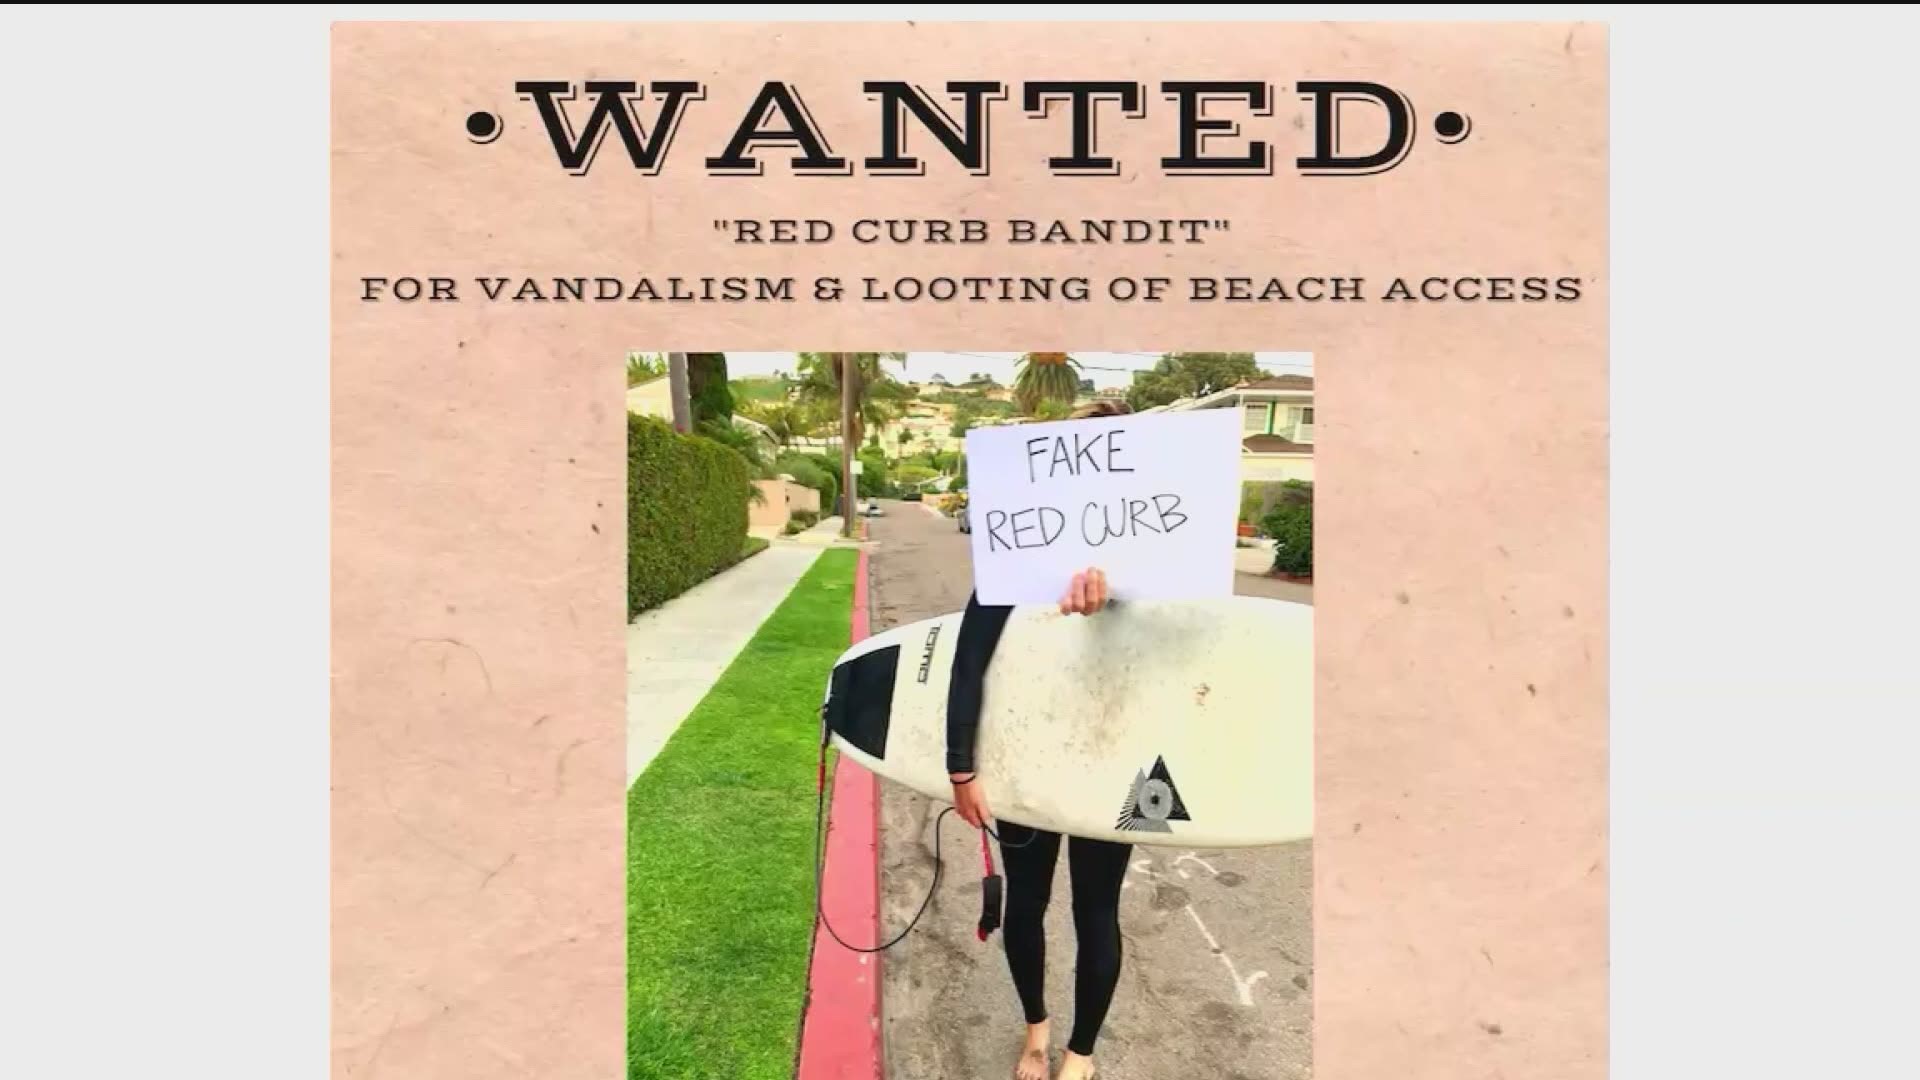 'Red curb bandit' angering surfers in La Jolla